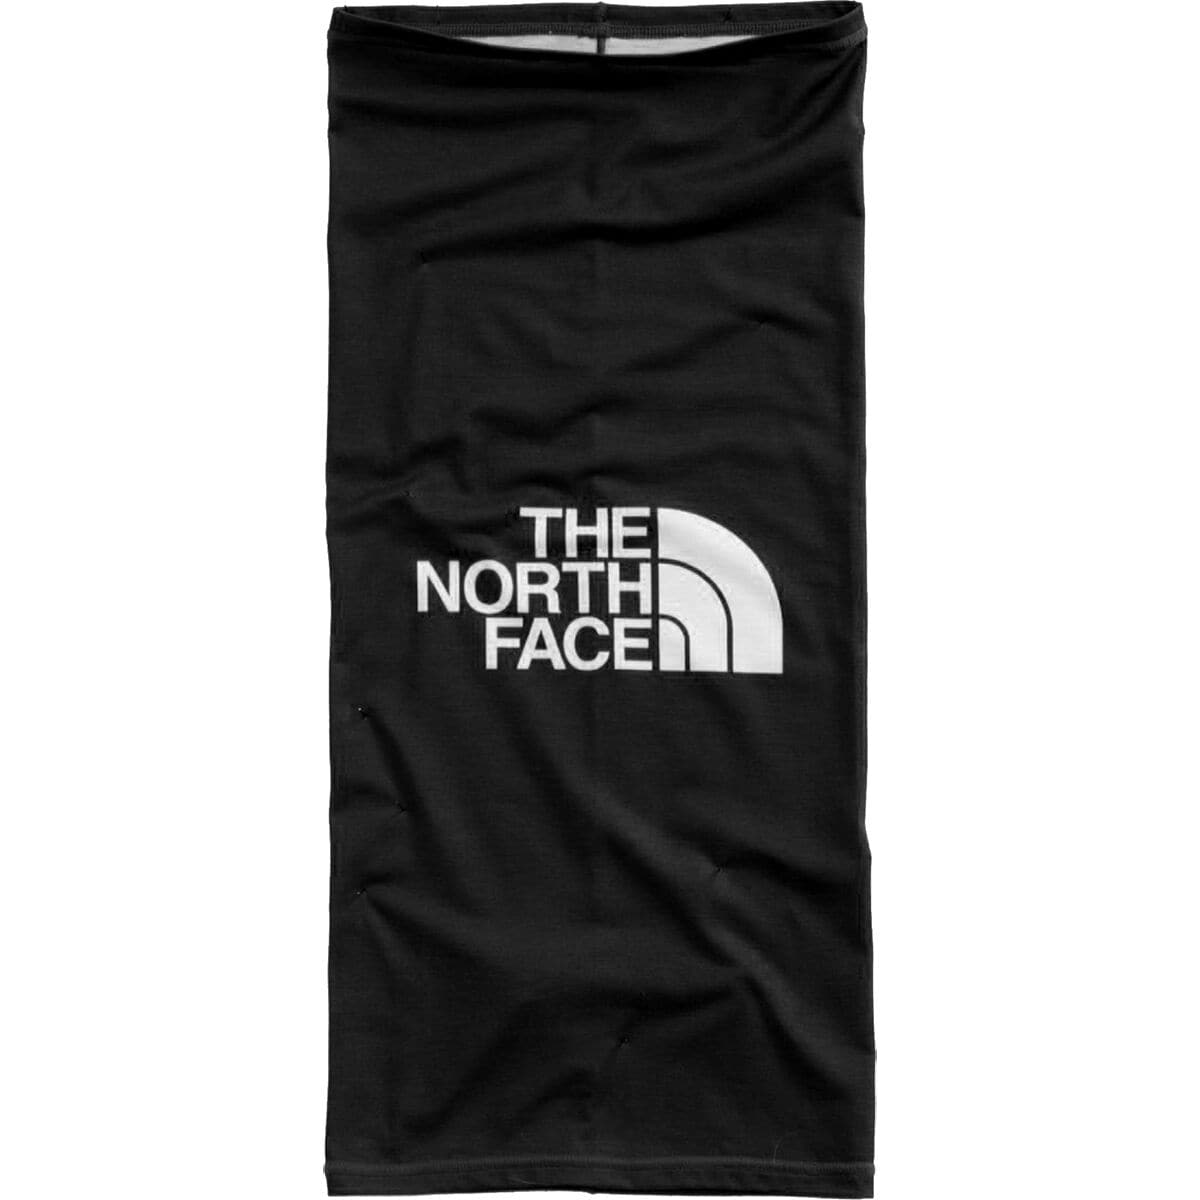 The North Face Dipsea Cover It Neck Gaiter